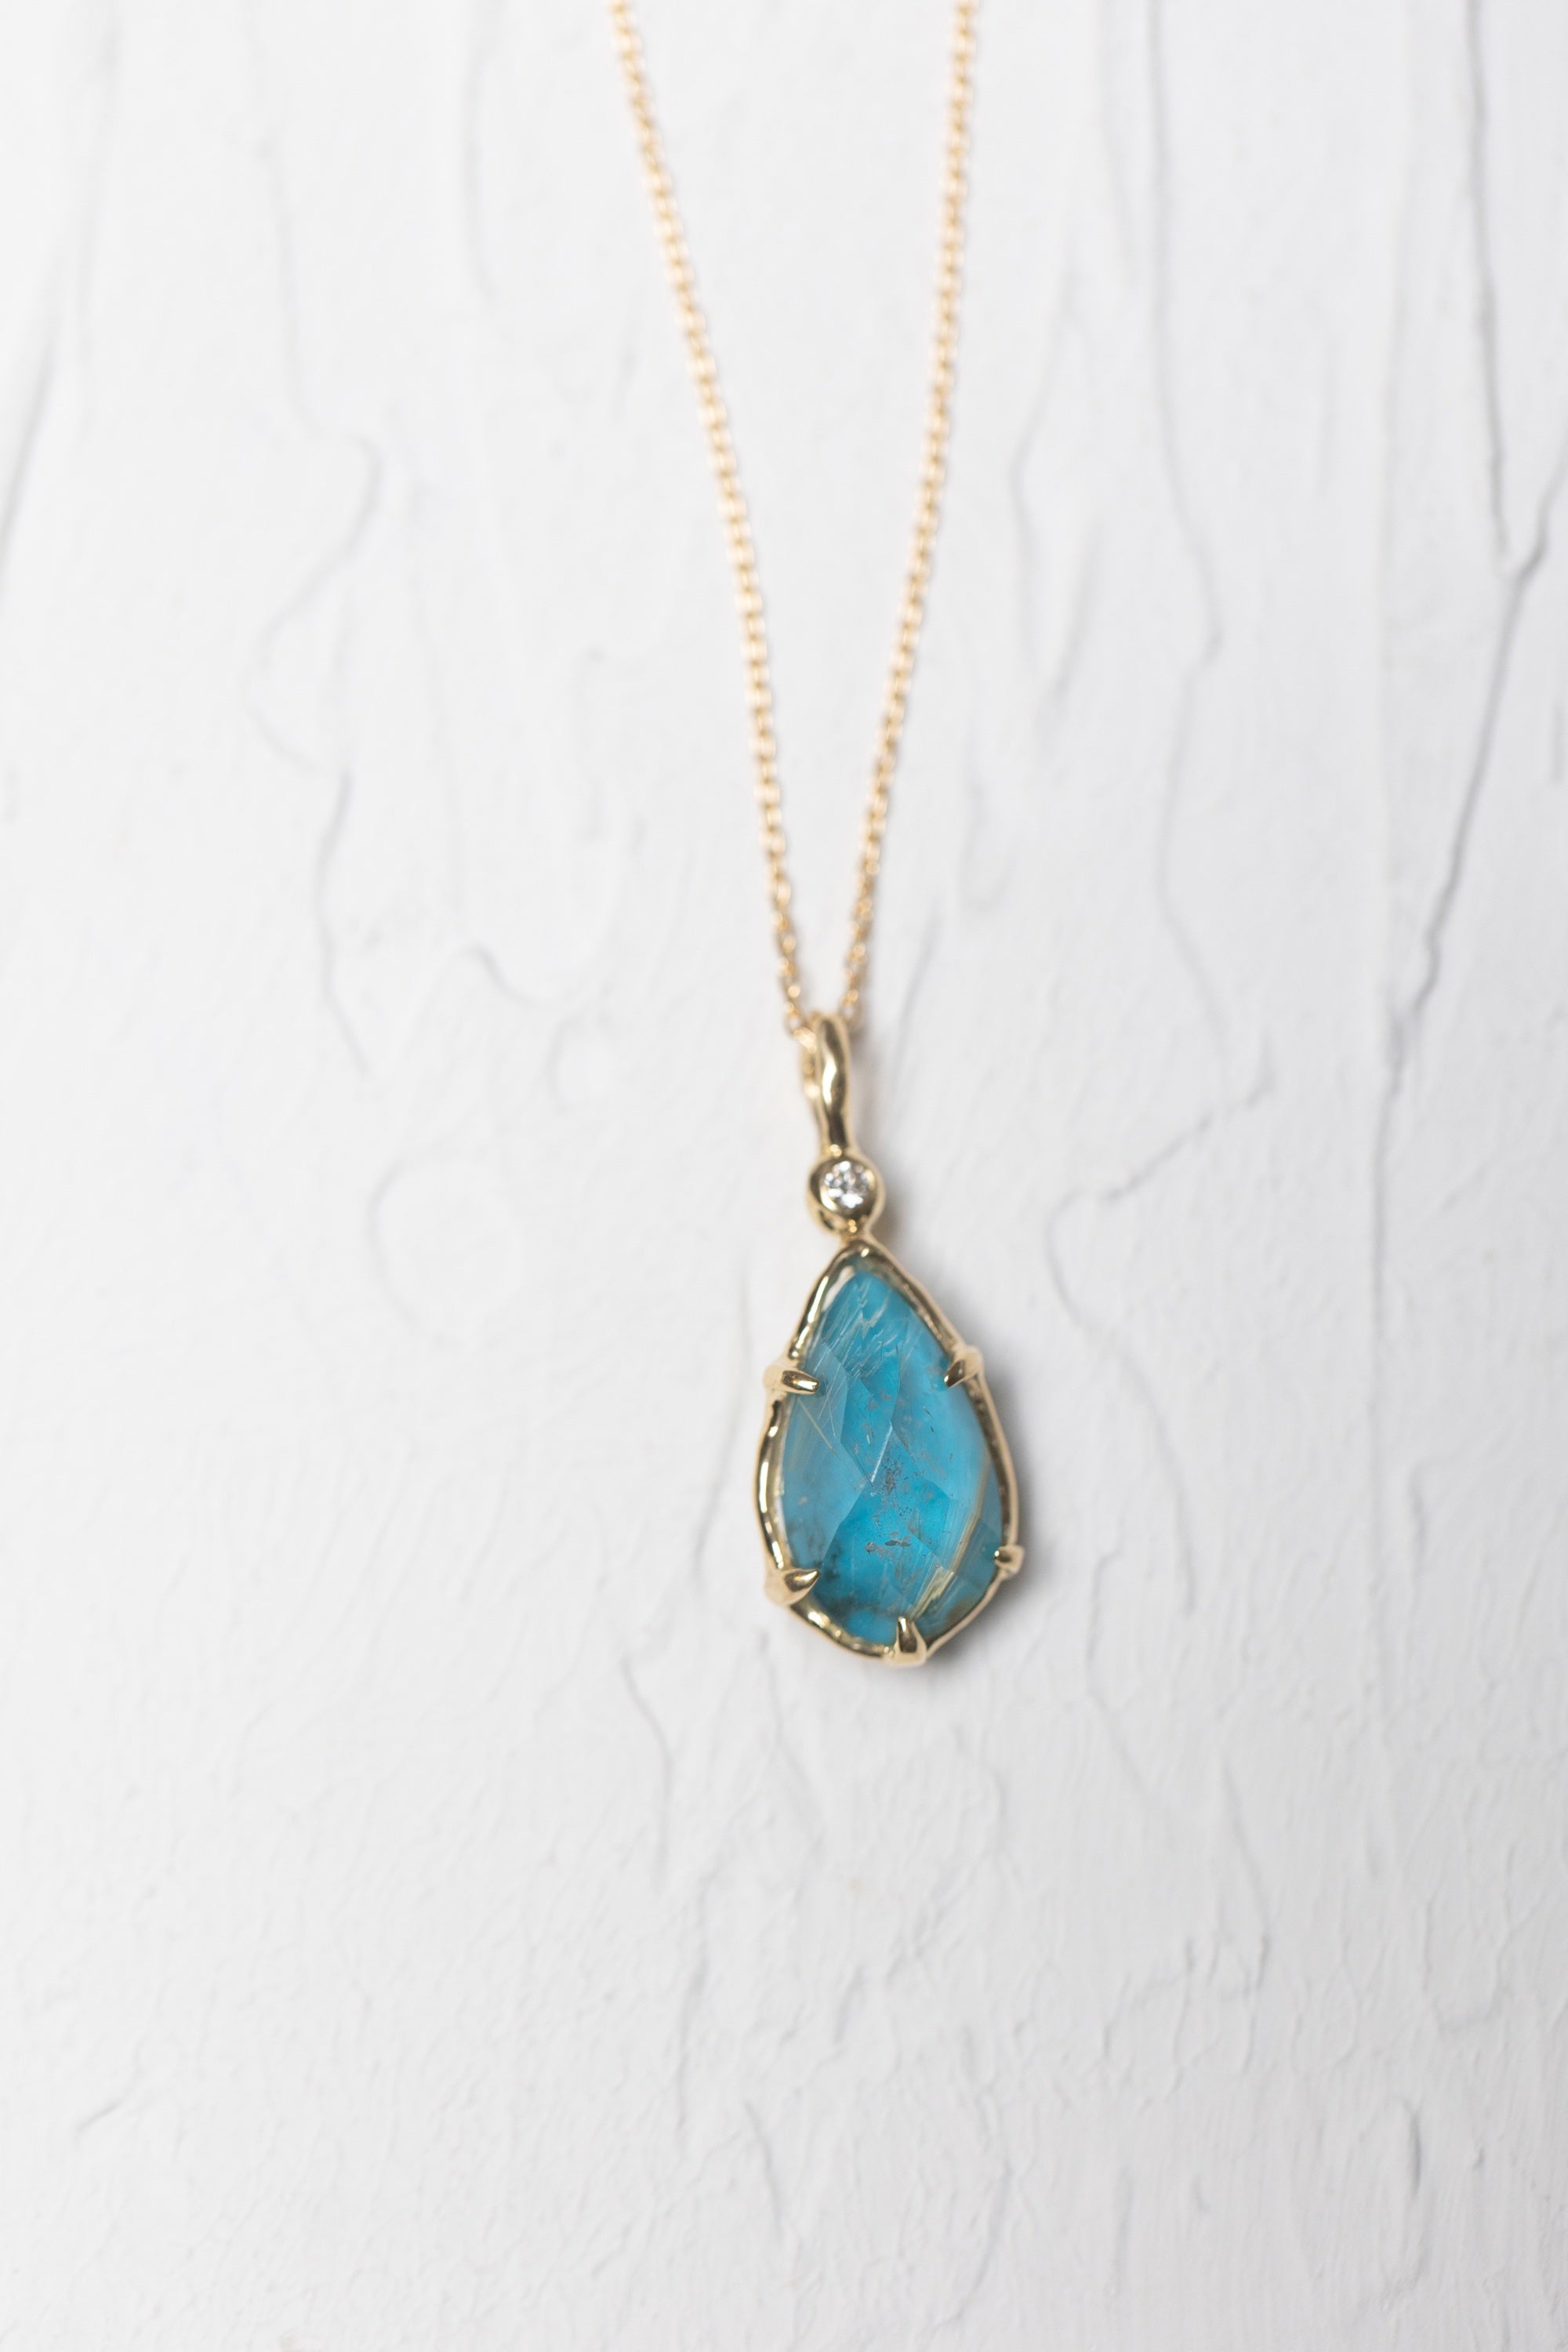 Tear-shaped Turquoise and Rutilated Quartz Doublet Necklace (18k)